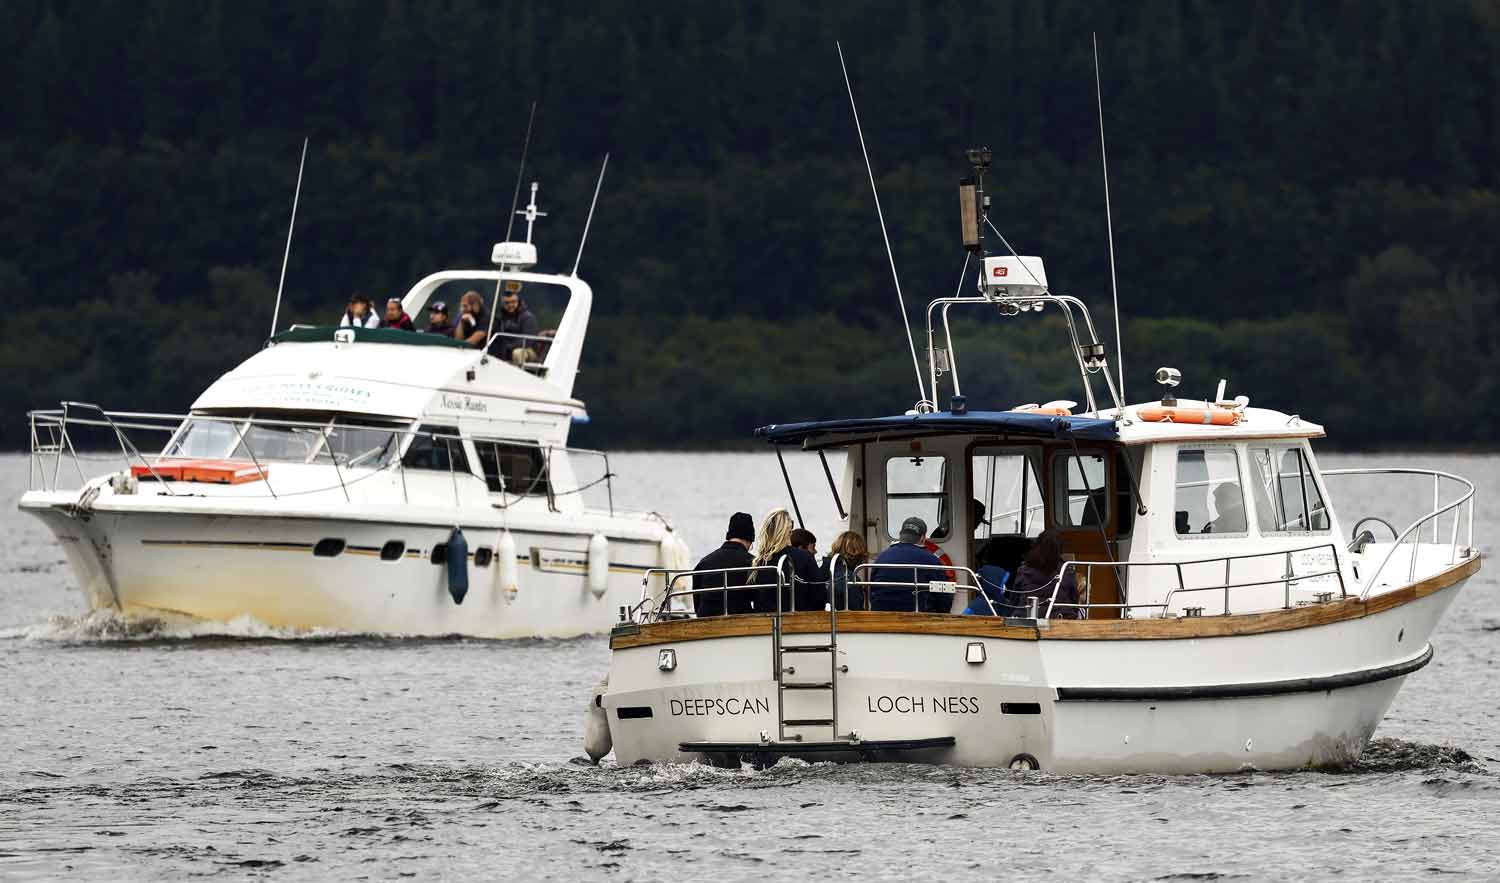 People aboard a boat called Nessie Hunter and a boat called Deep Scan Loch Ness on a body of water.